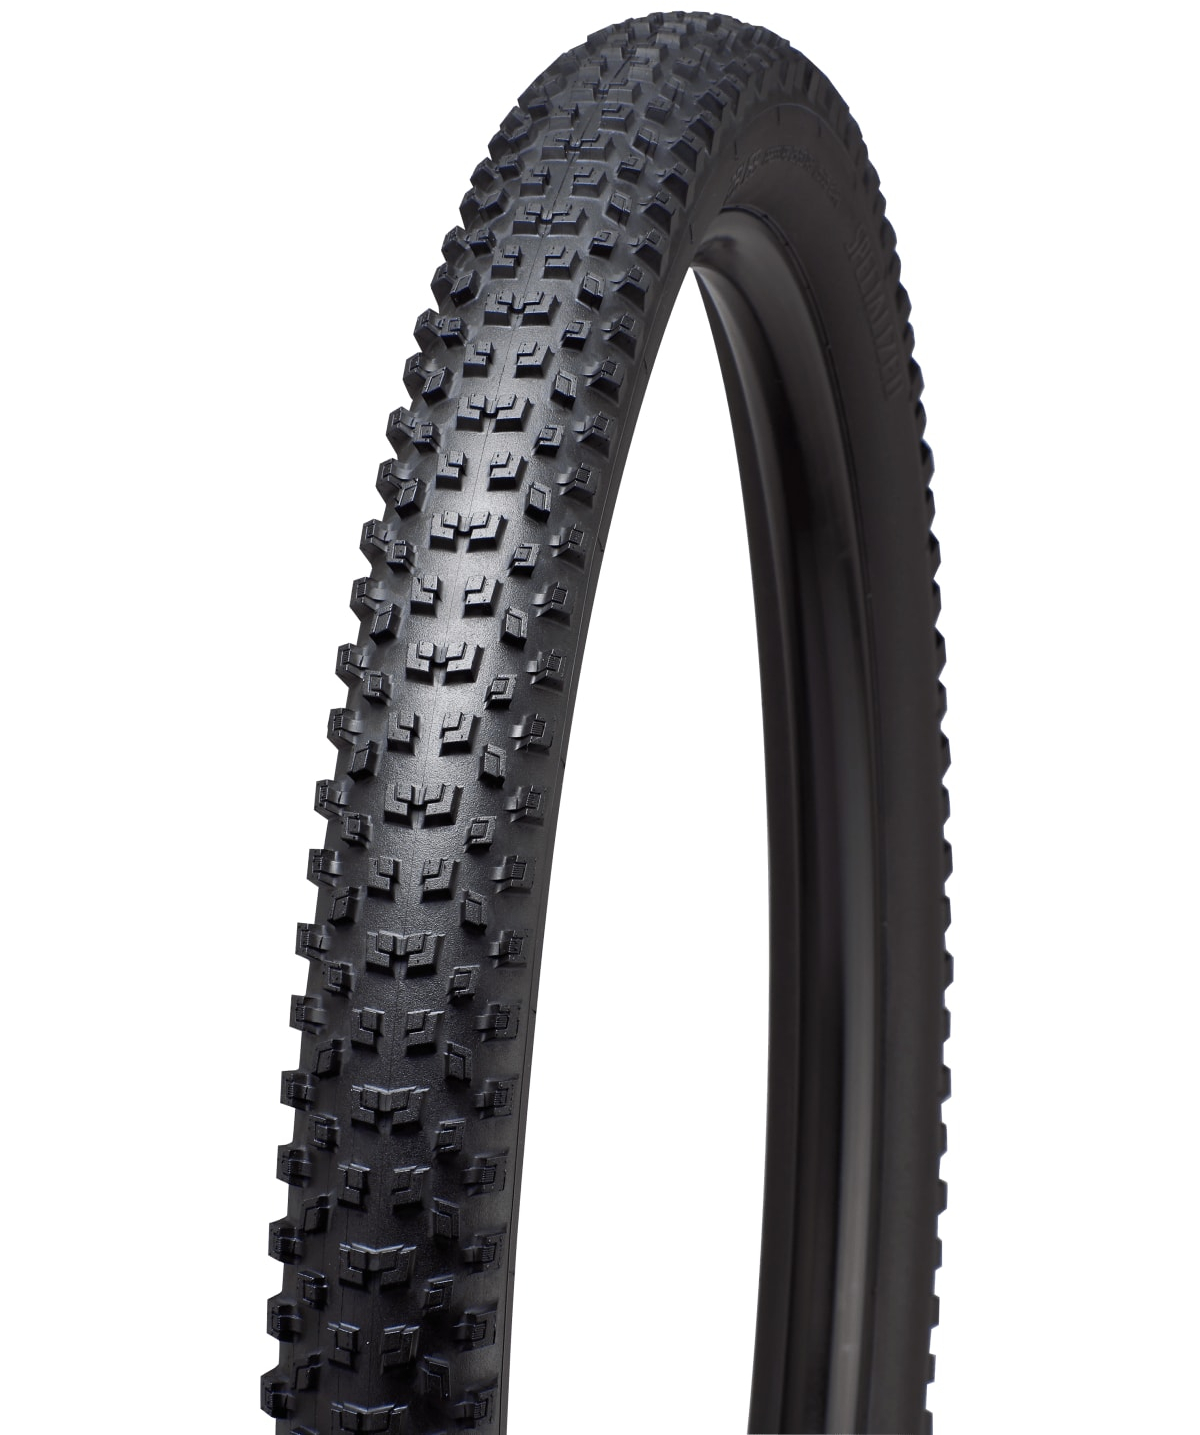 Cycles UK Specialized  Ground Control Grid 2Bliss Ready T7 Mountain Bike Tyre 27 x 2.35 27.5/650B X 2.35 Black